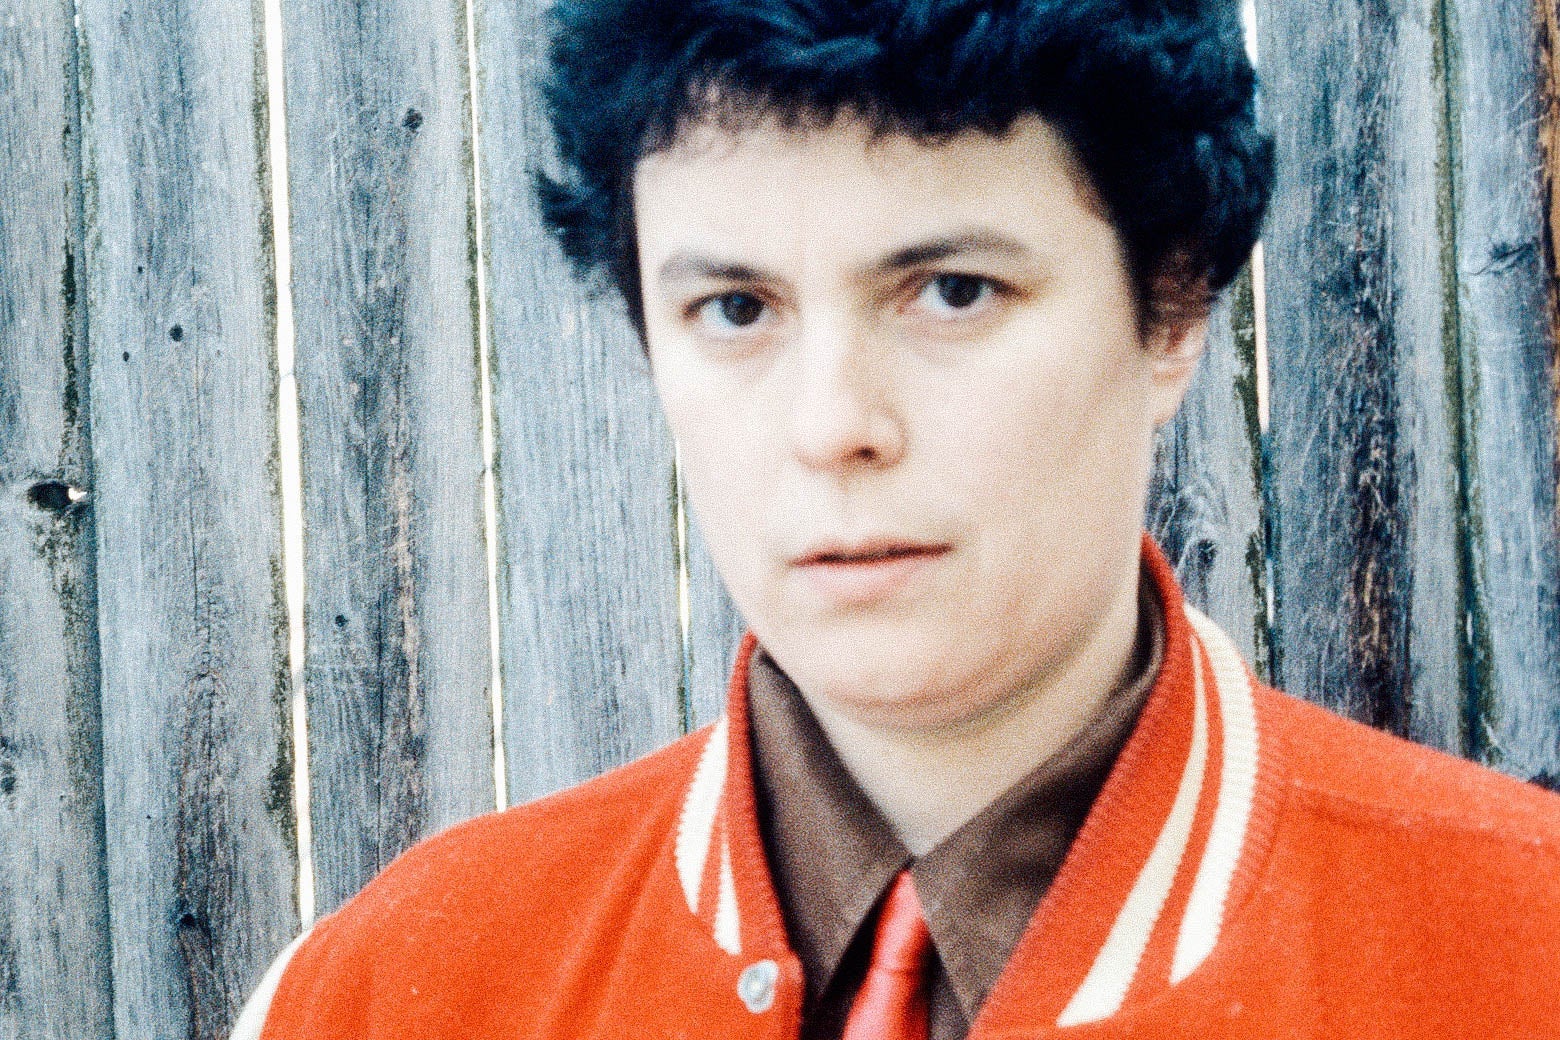 A young woman with short hair, a letter jacket, and a red tie, stares confidently into the camera.